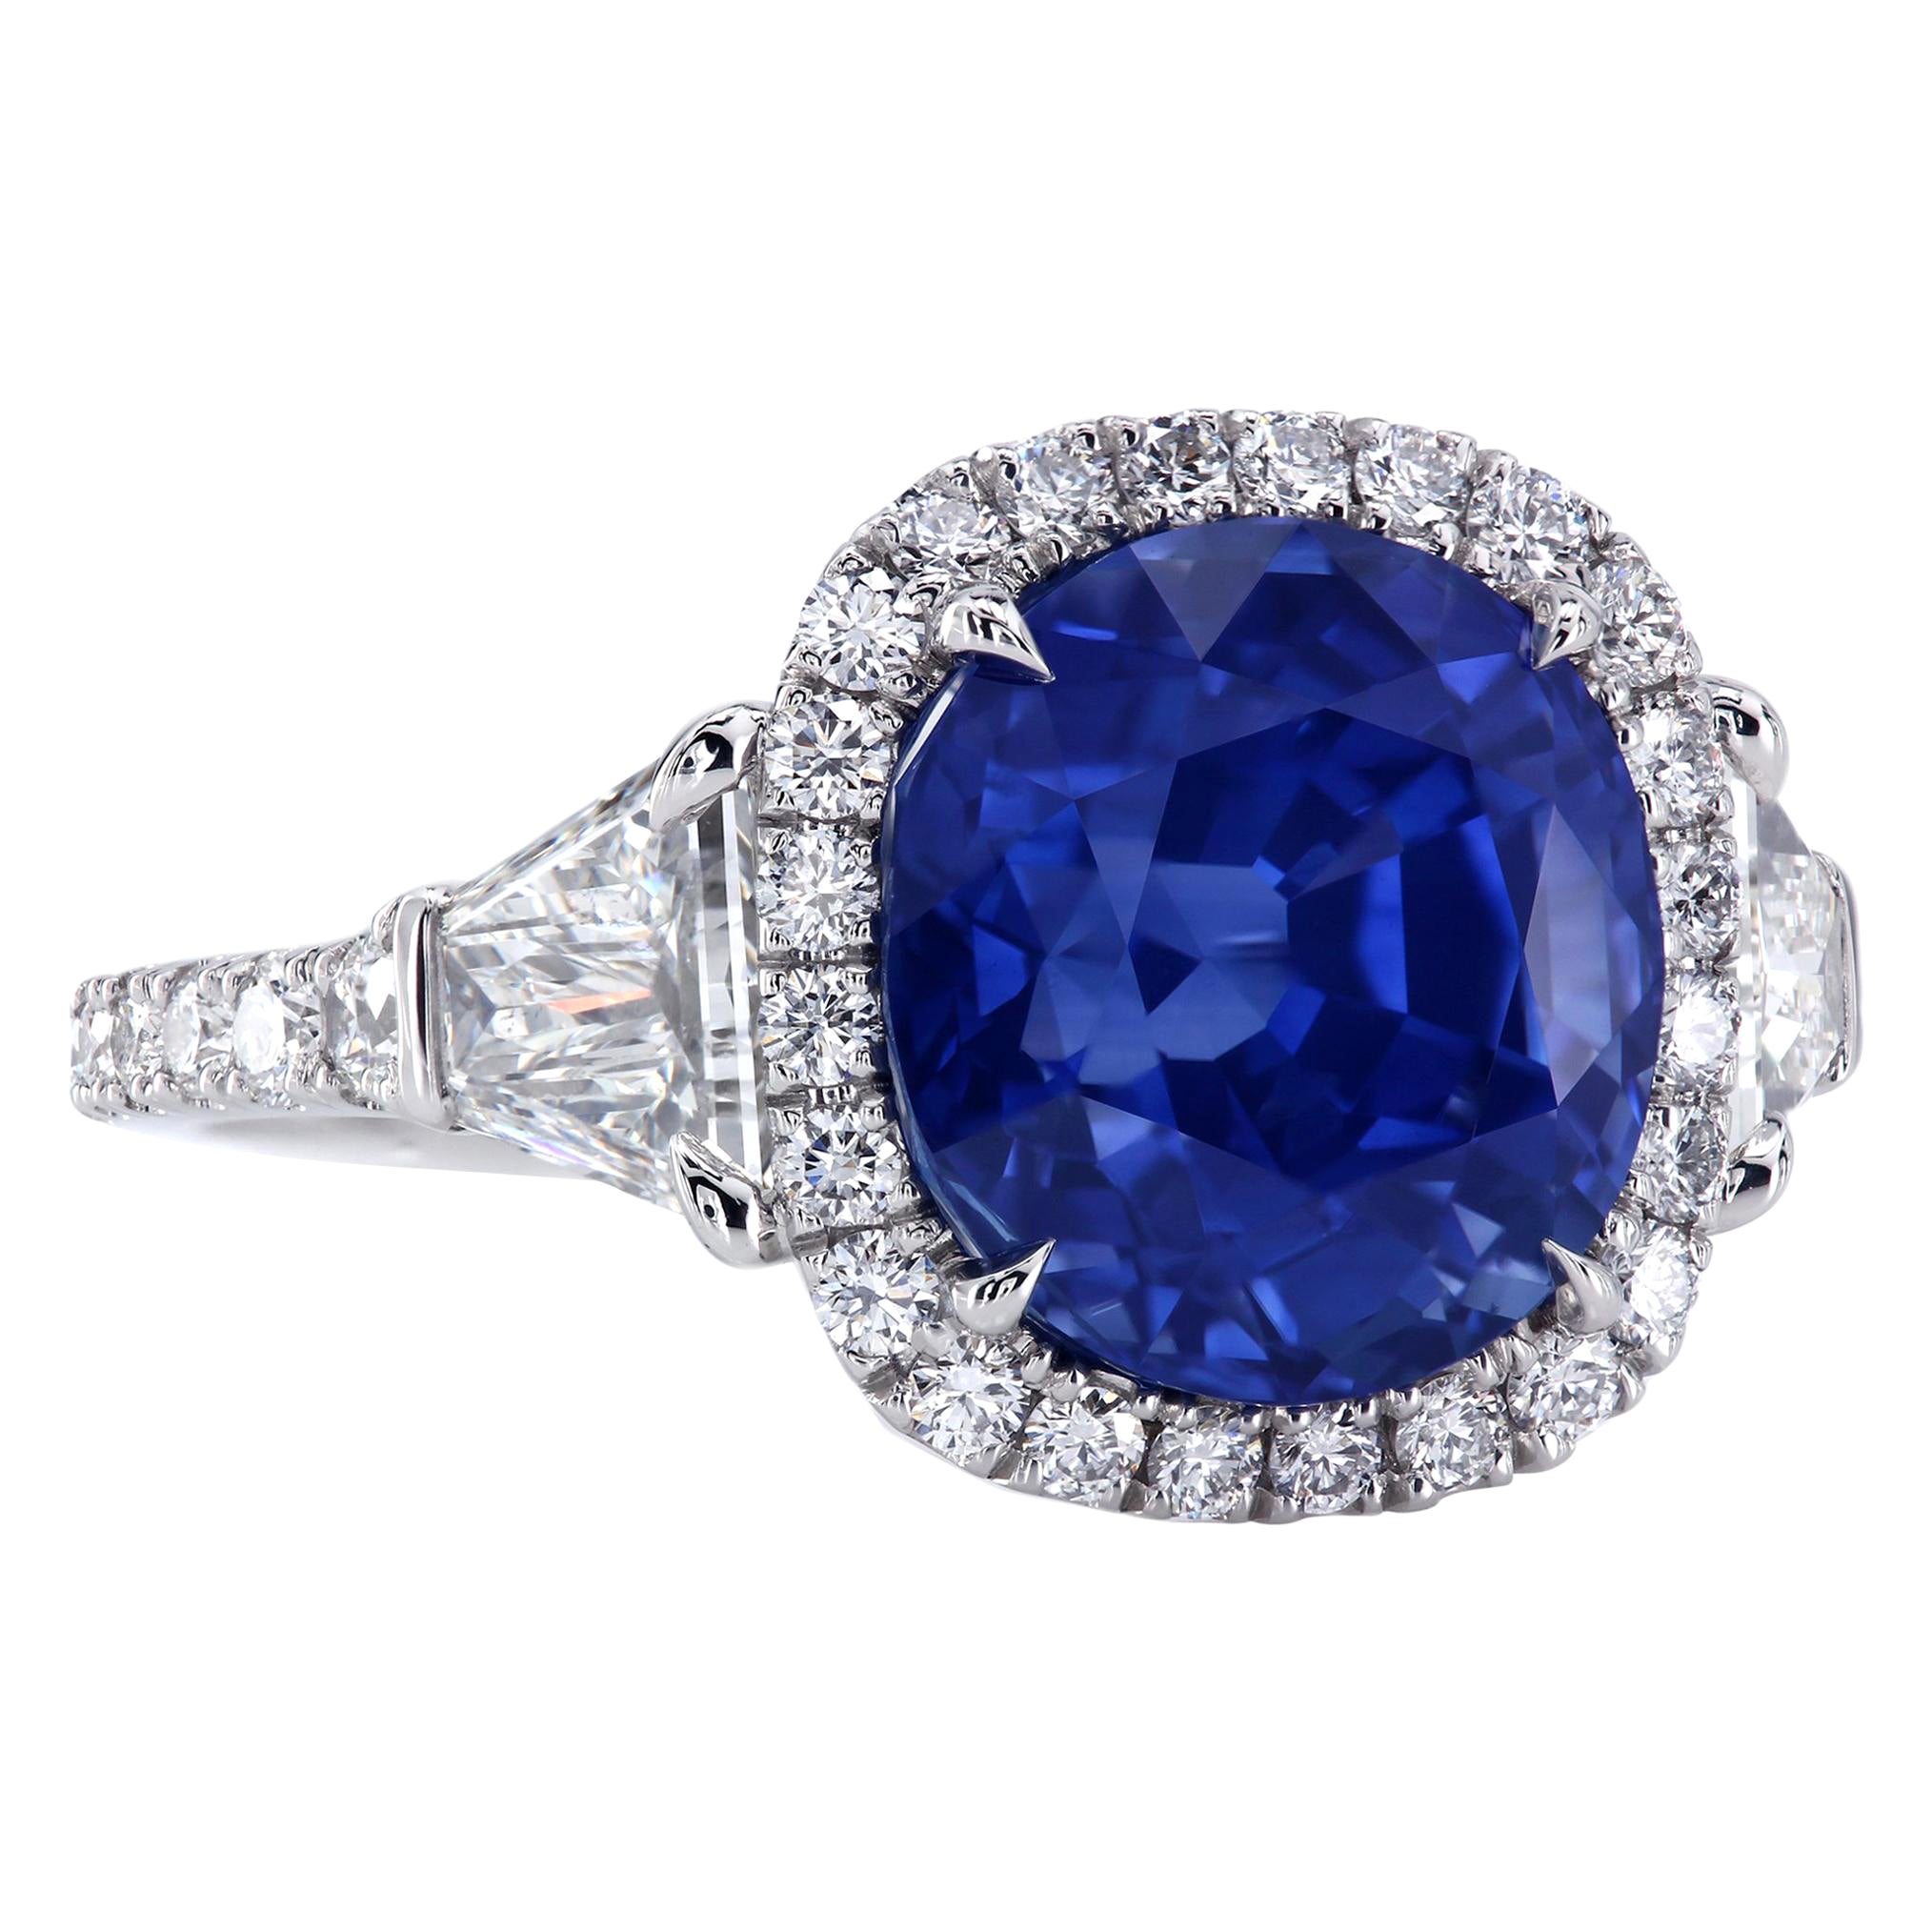 Leon Mege Halo Platinum Three-stone Ring with Certified Blue Cushion Sapphire  For Sale